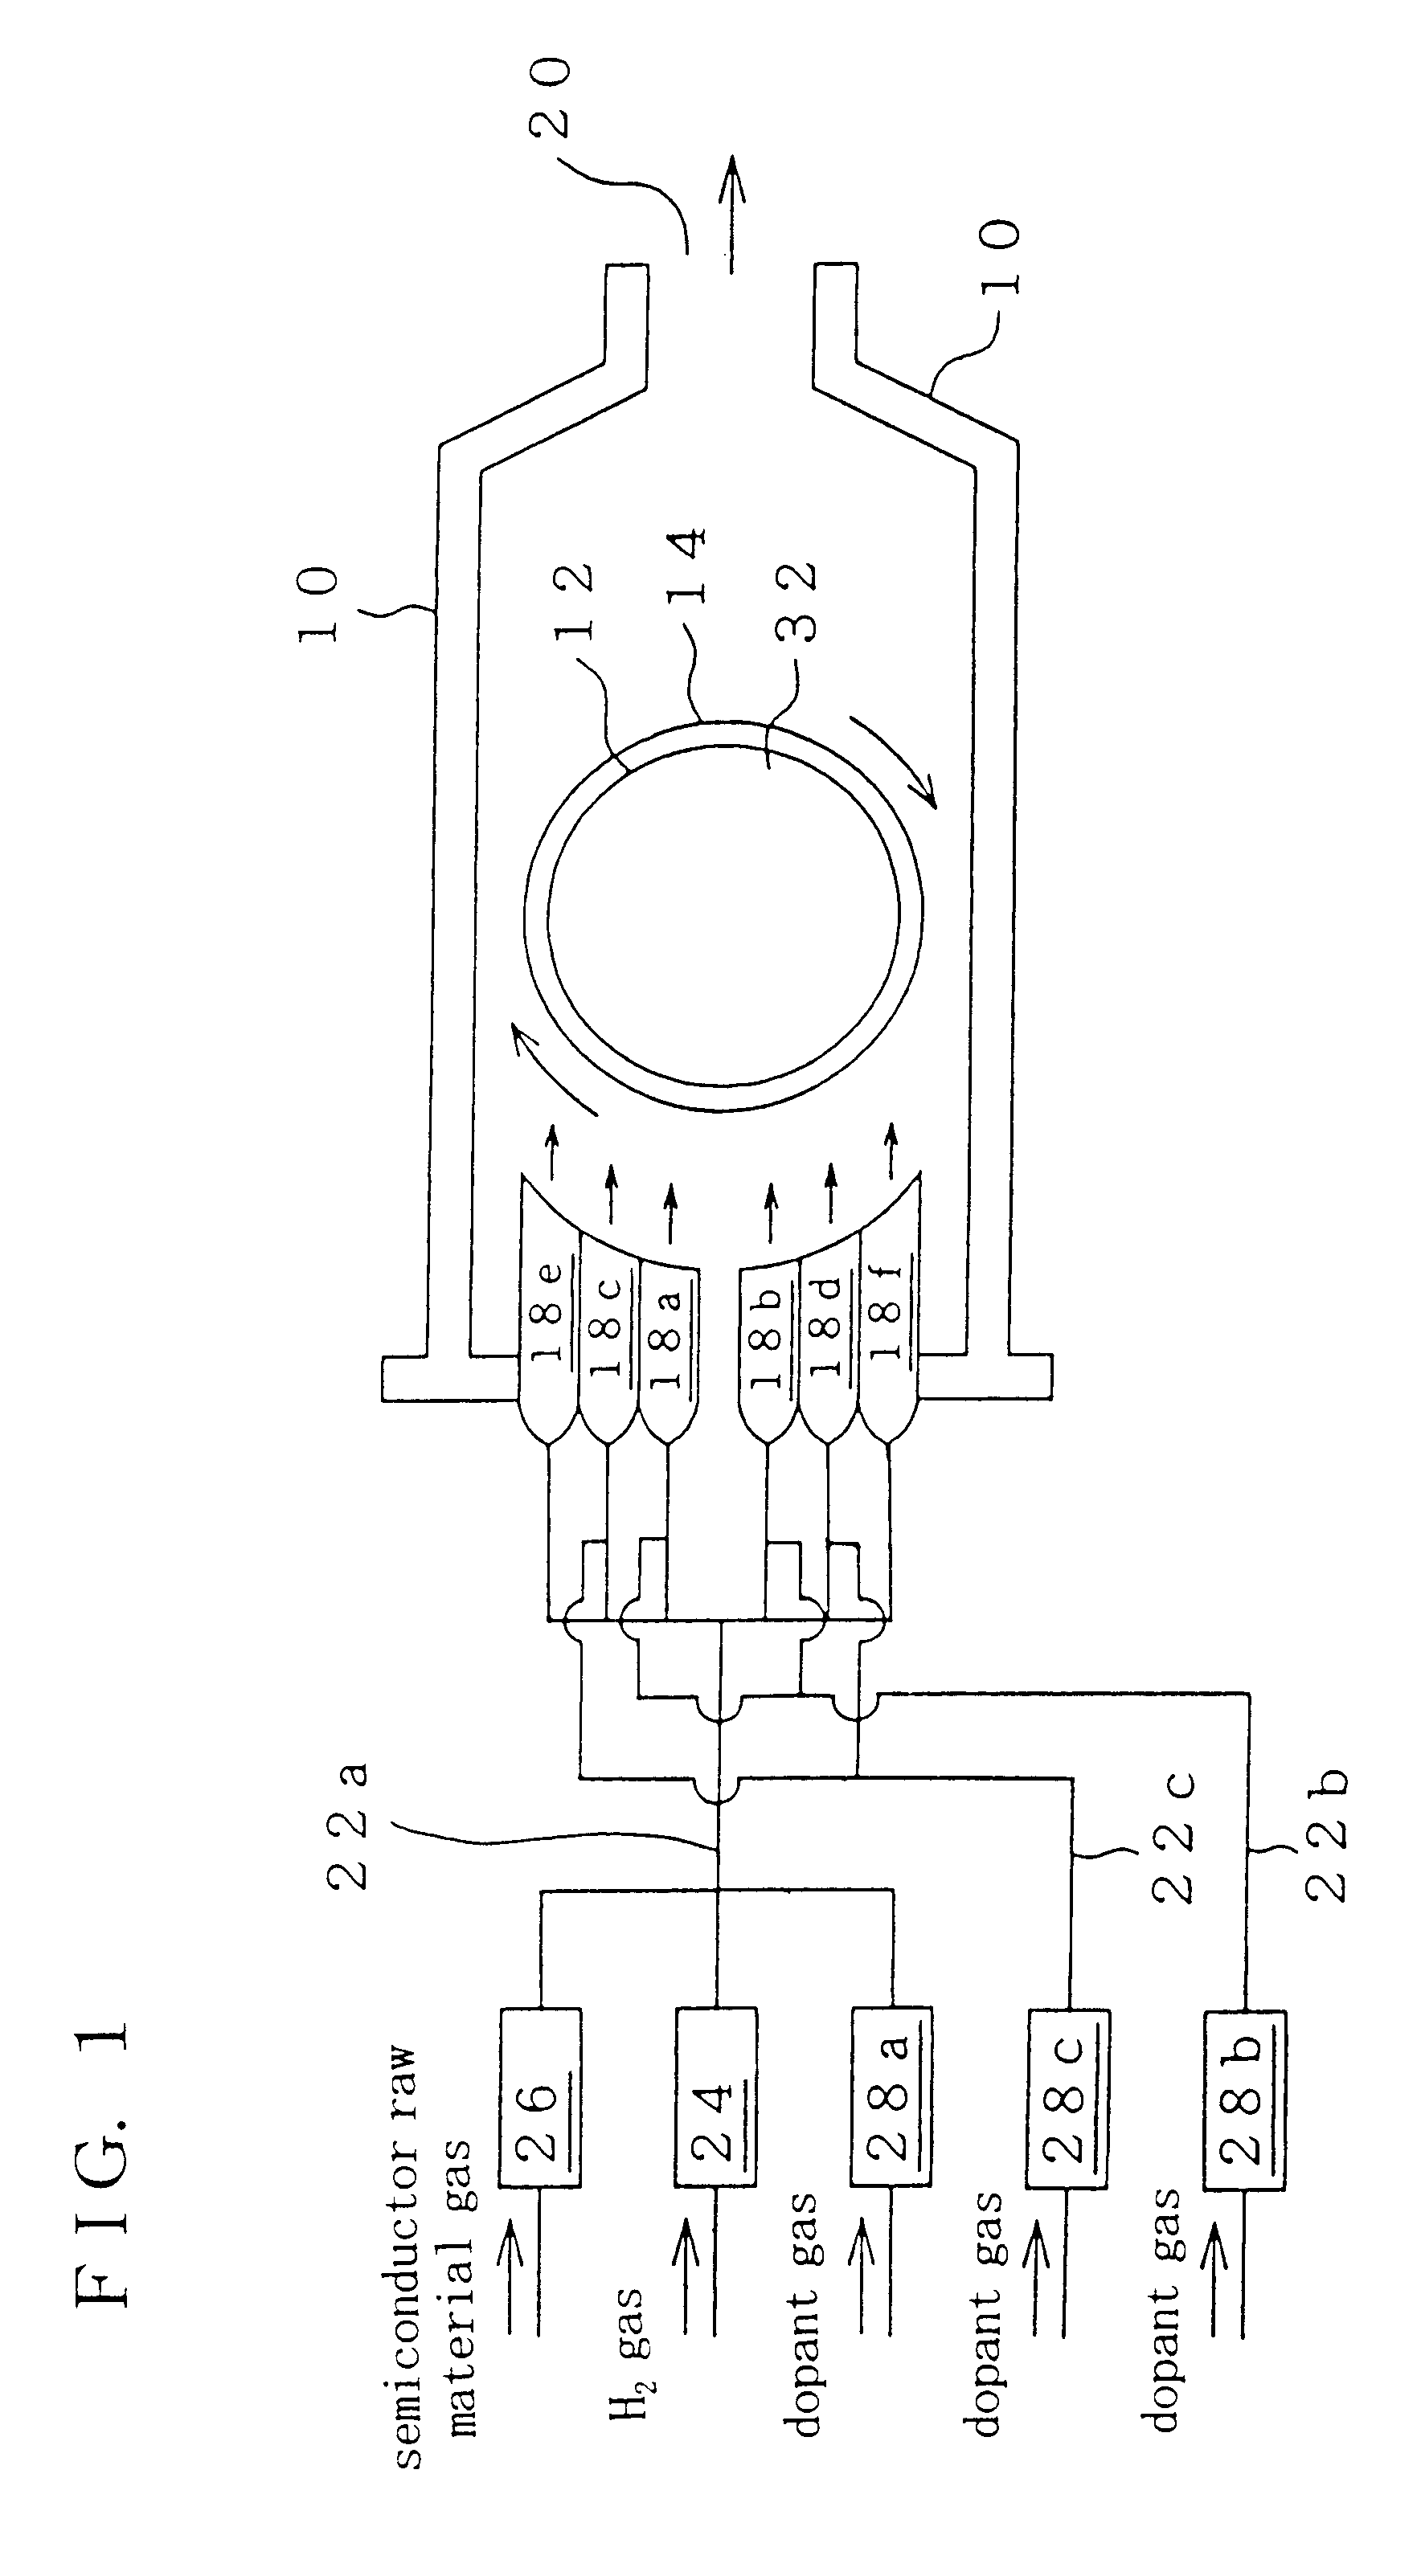 Semiconductor wafer and vapor growth apparatus